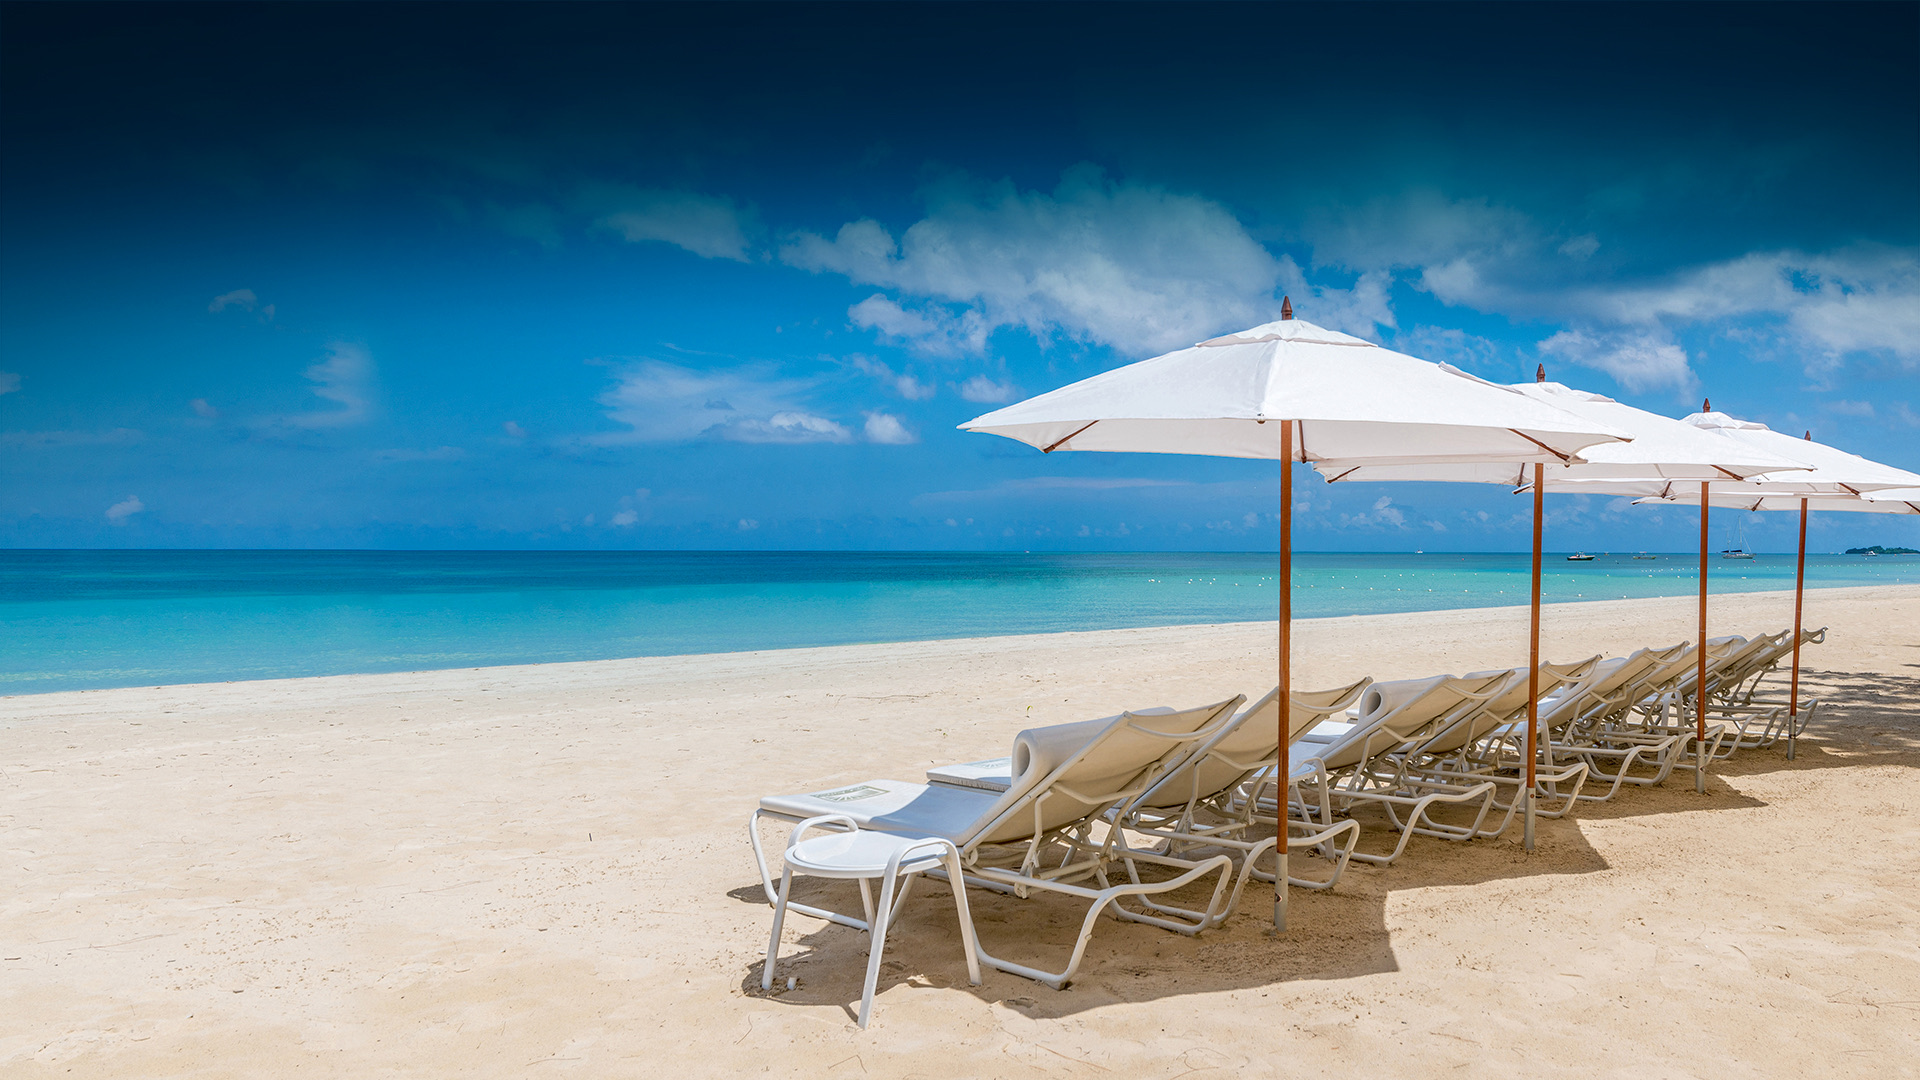 Lounge chairs with umbrellas opened in the sand on the beach.